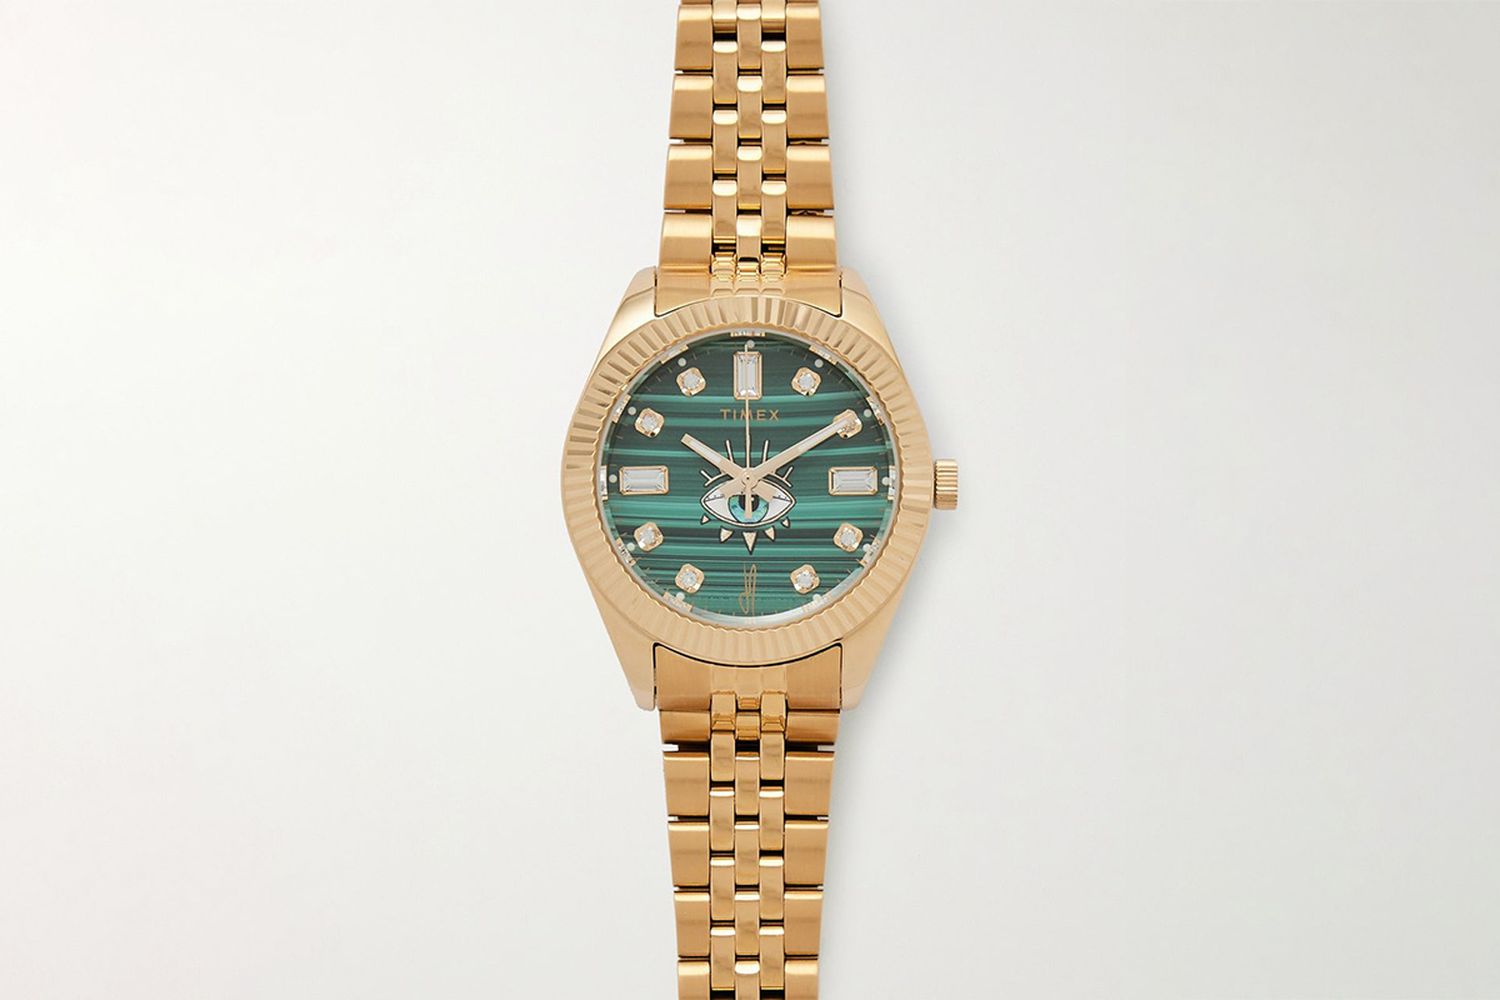 Jacquie Aiche 38mm Gold-Tone Stainless Steel and Malachite Watch